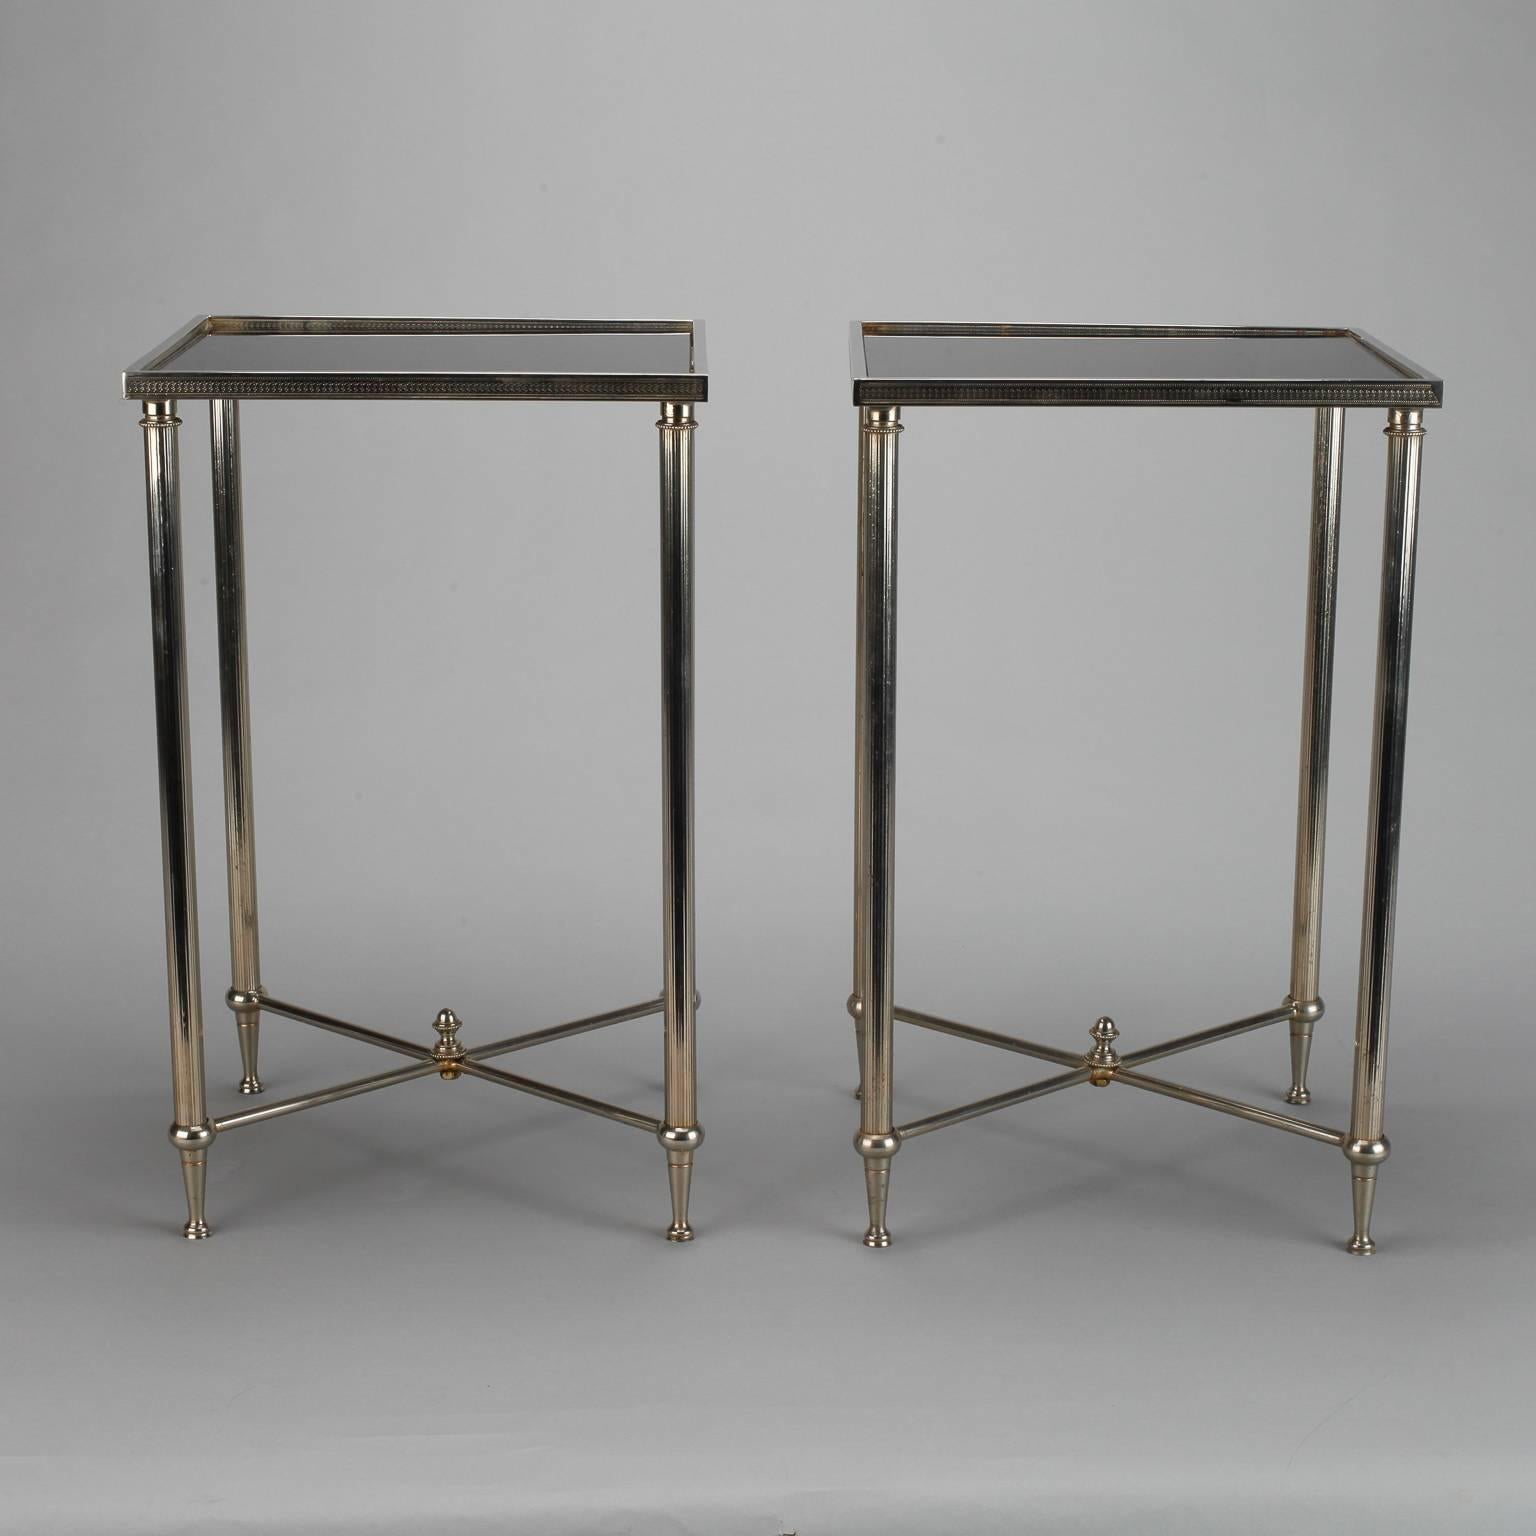 Pair of circa 1960s small square accent tables found in France feature classically styled details including silver tone finish, reeded legs, and criss-cross X-form stretchers topped with finials. Table tops are black glass. Sold and priced as a pair.